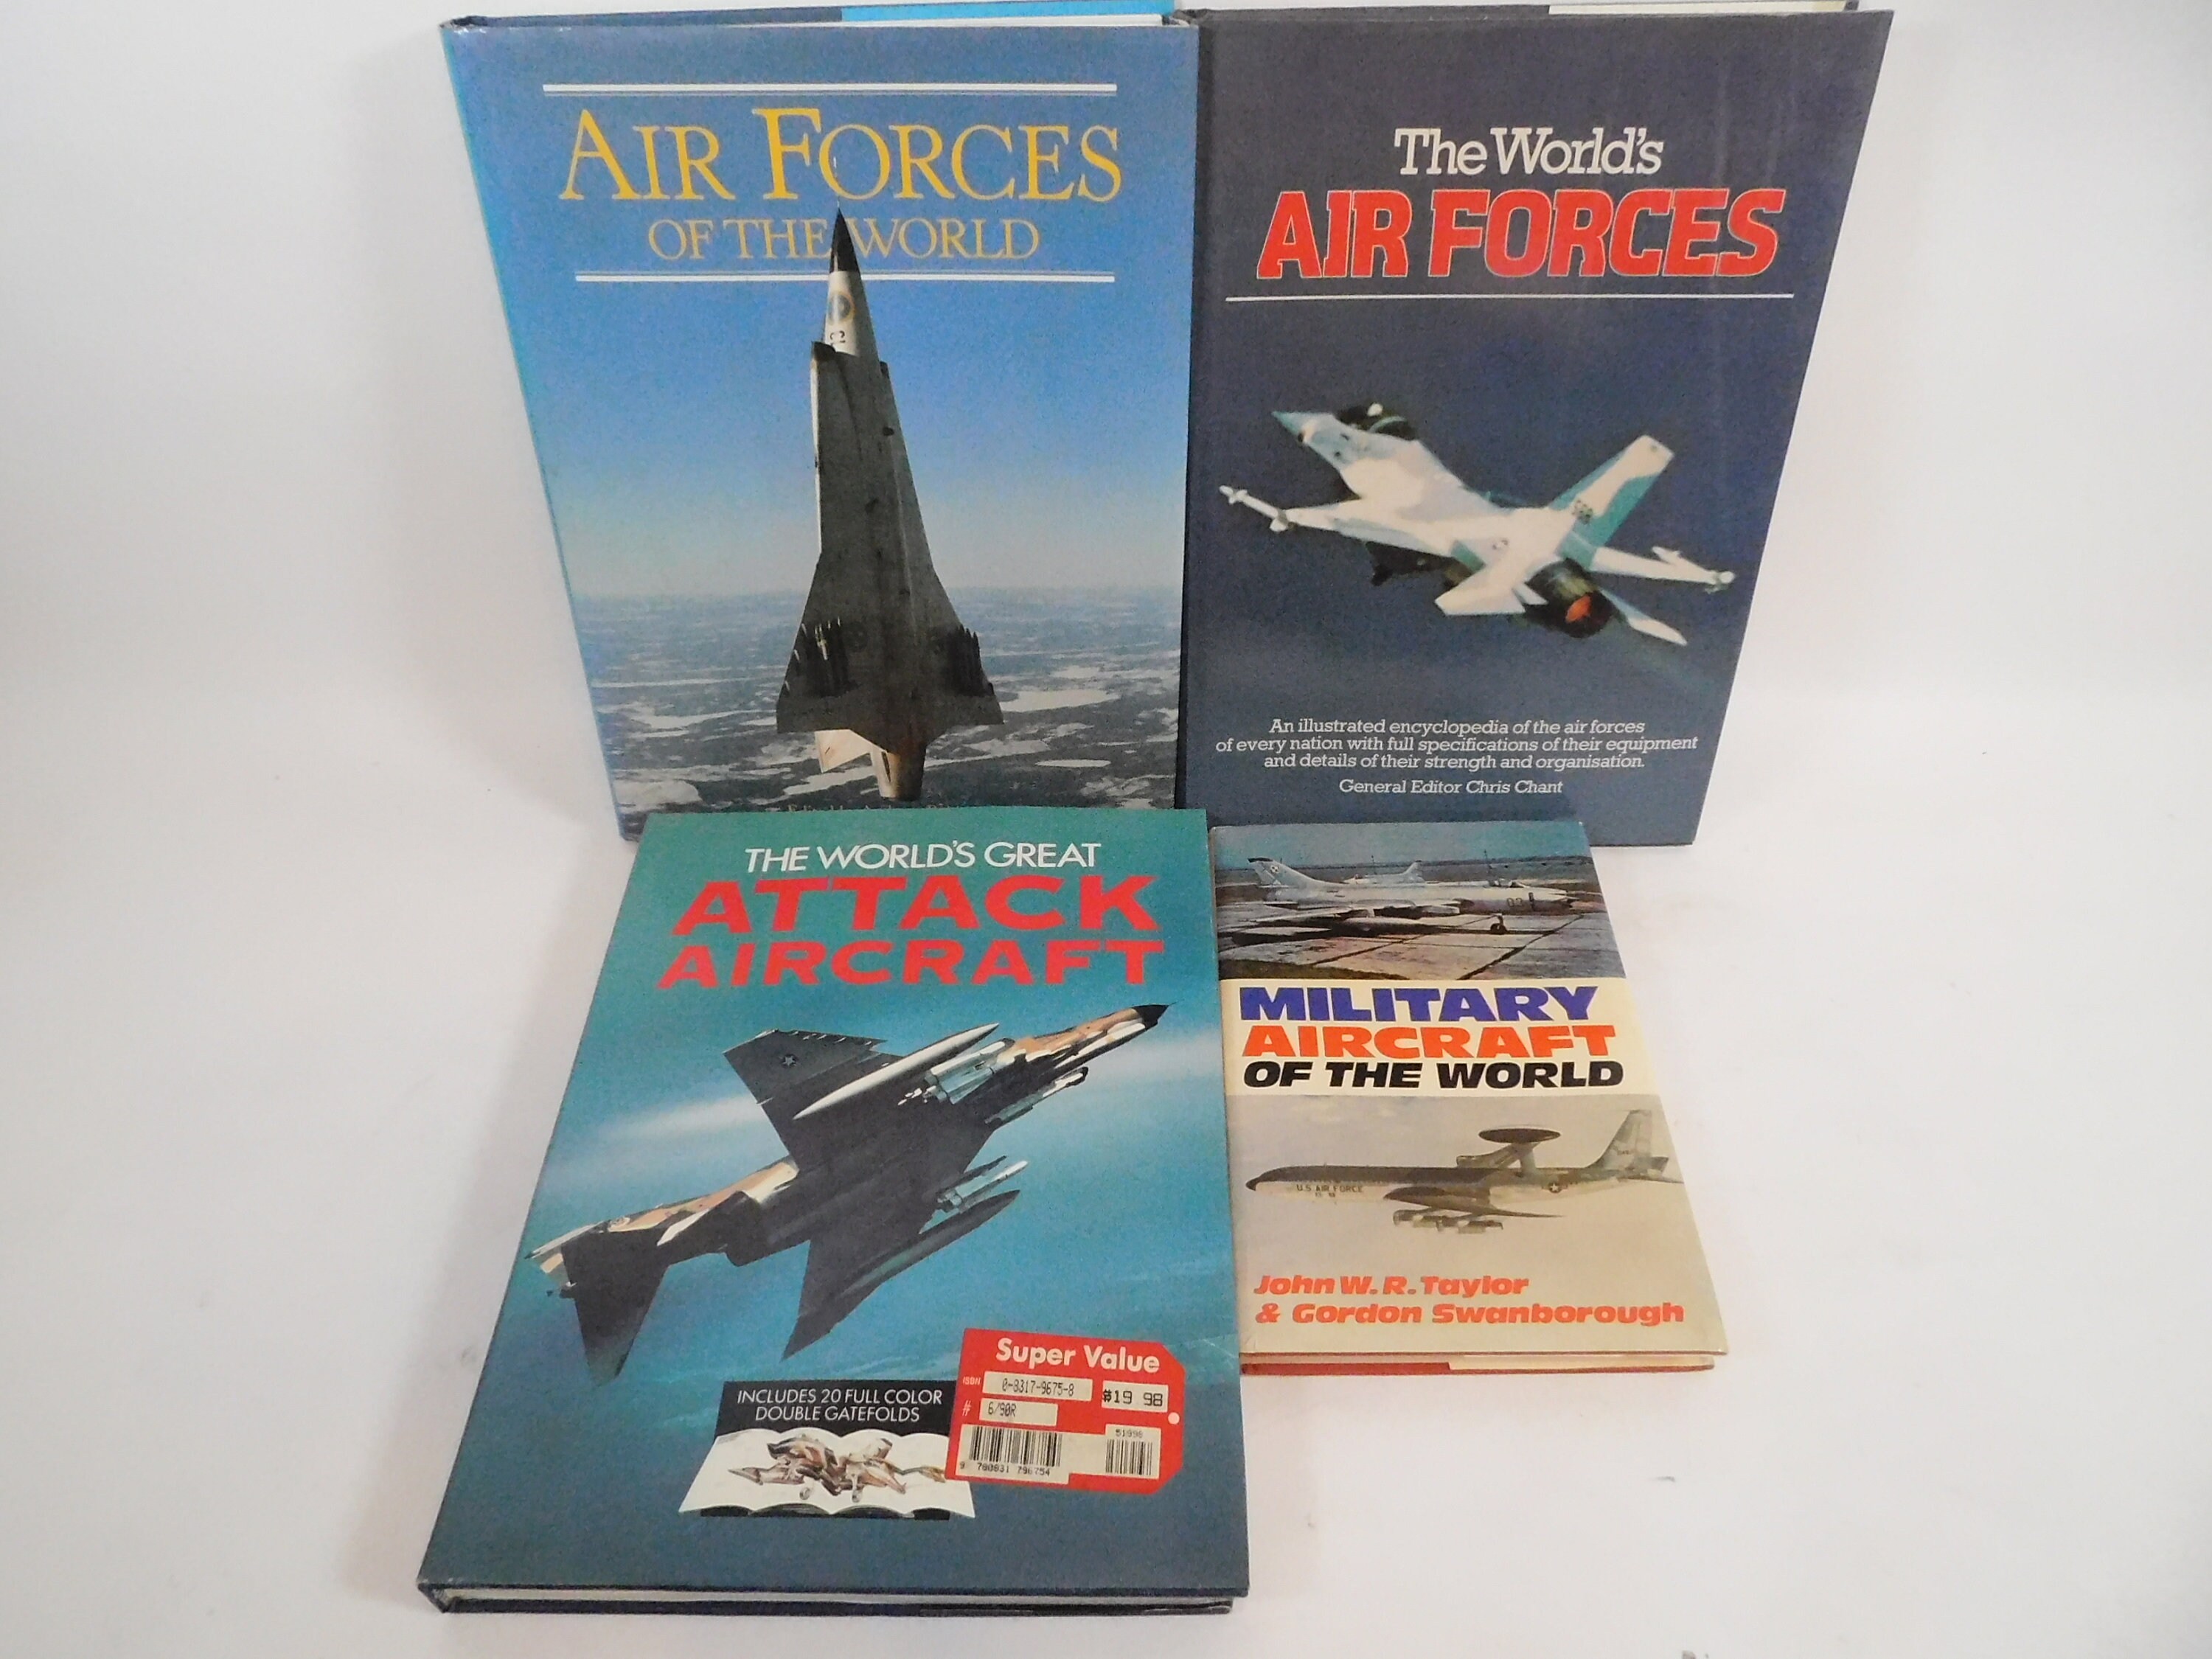 4 Books about Air Forces of the World and Military Aircraft | Etsy